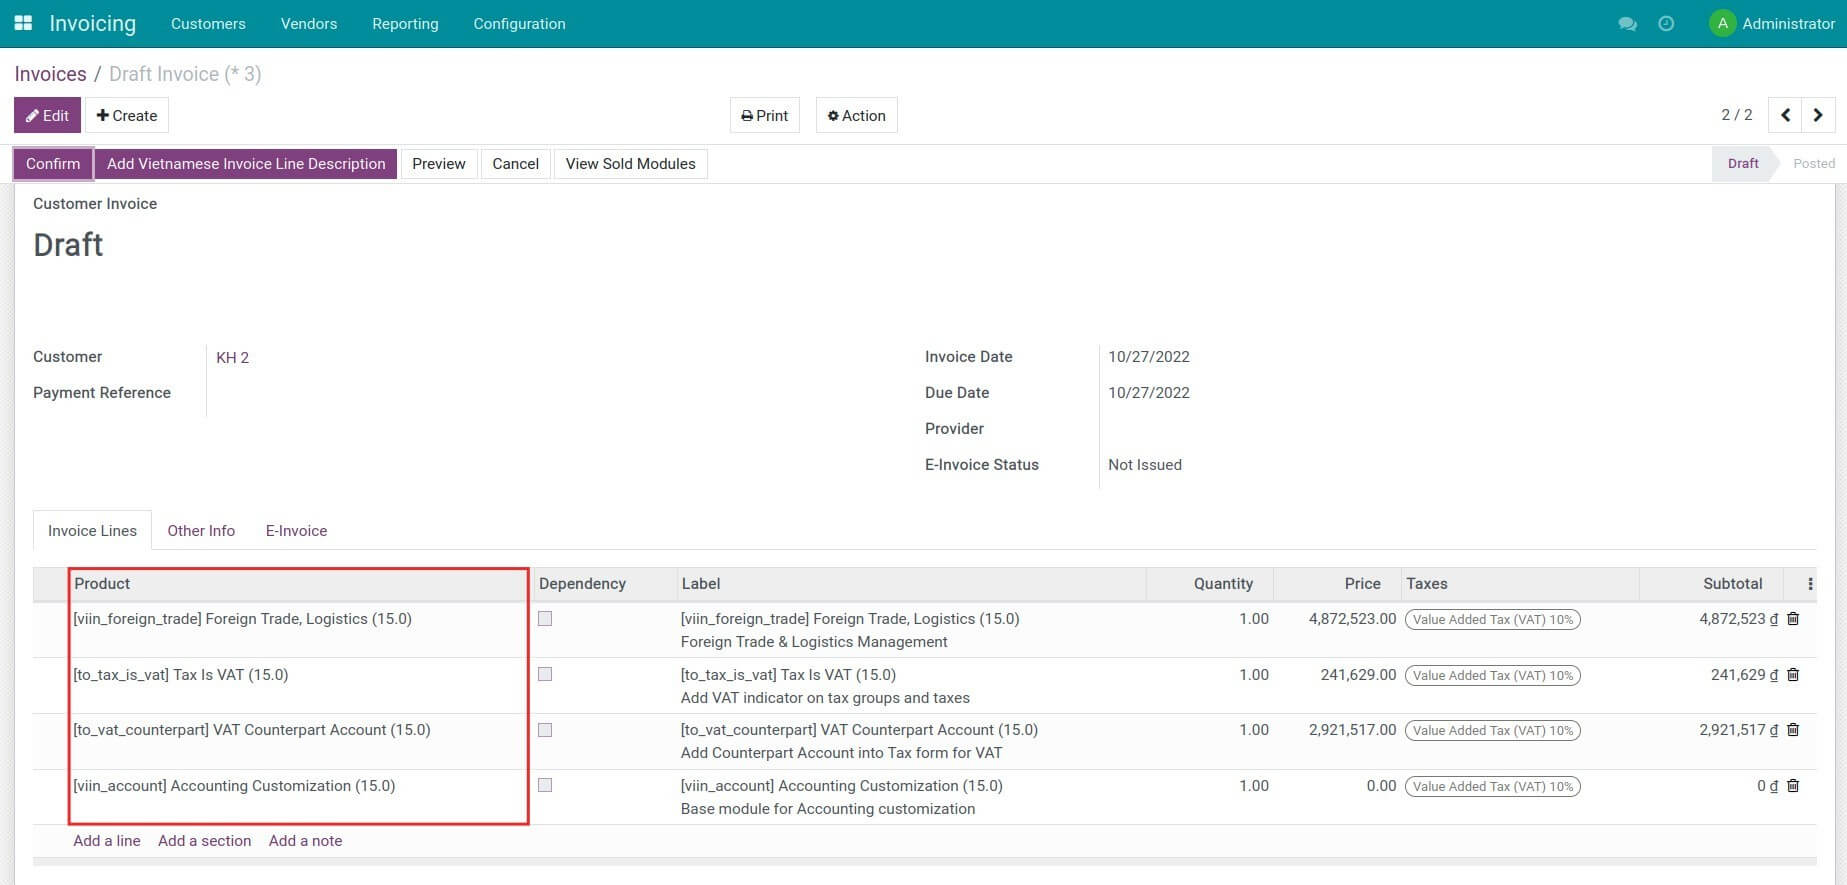 Create an invoice for the sold module